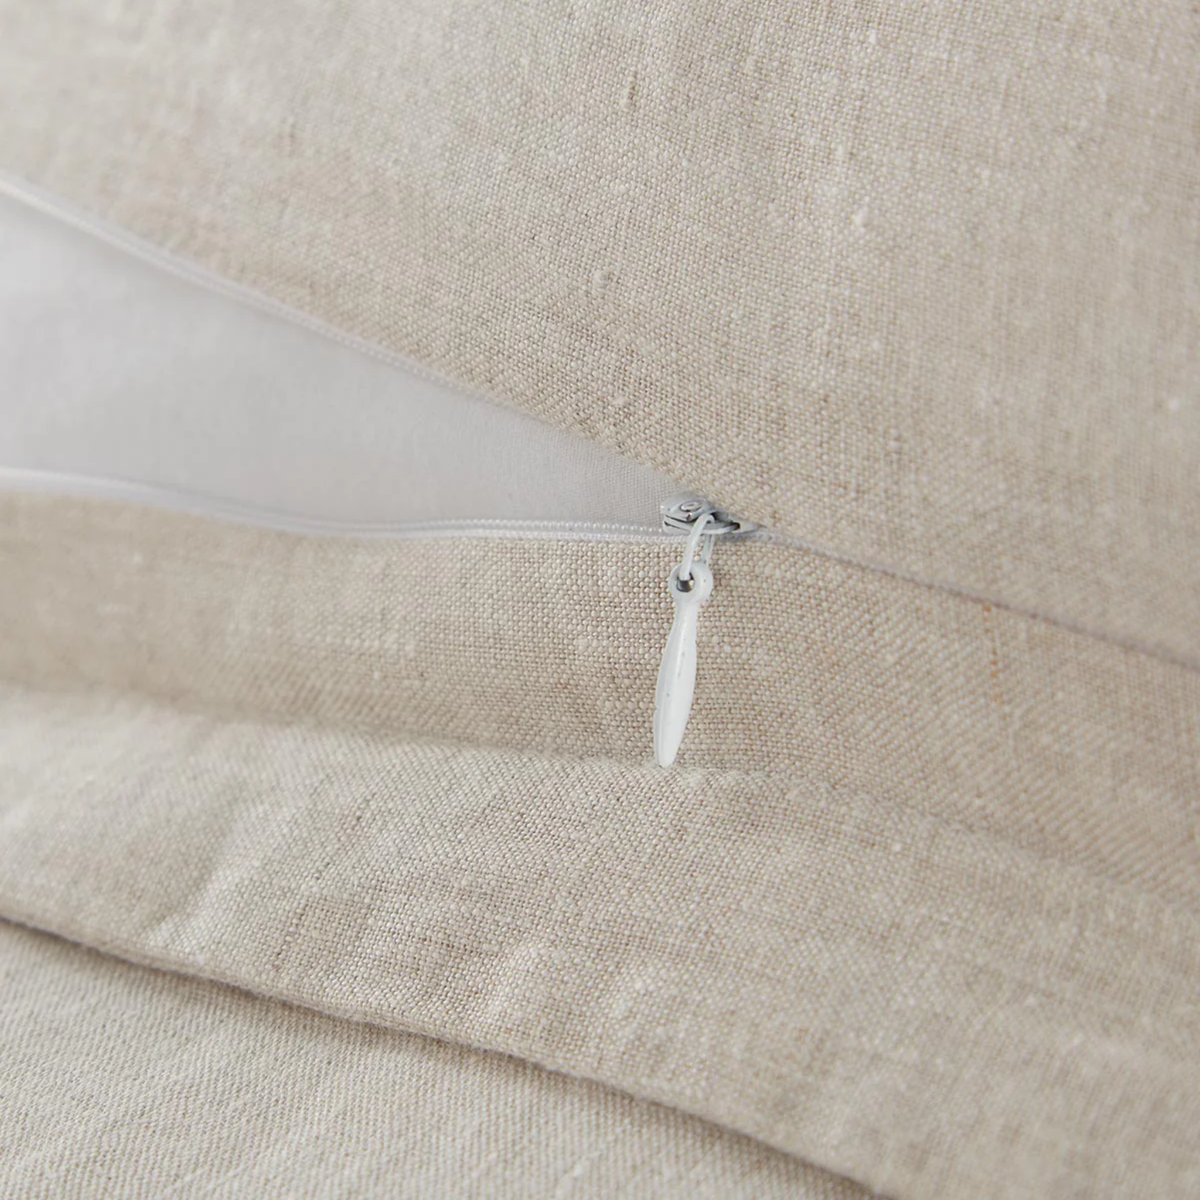 Zipper Closure of Peacock Alley European Washed Linen Bedding in Natural Color